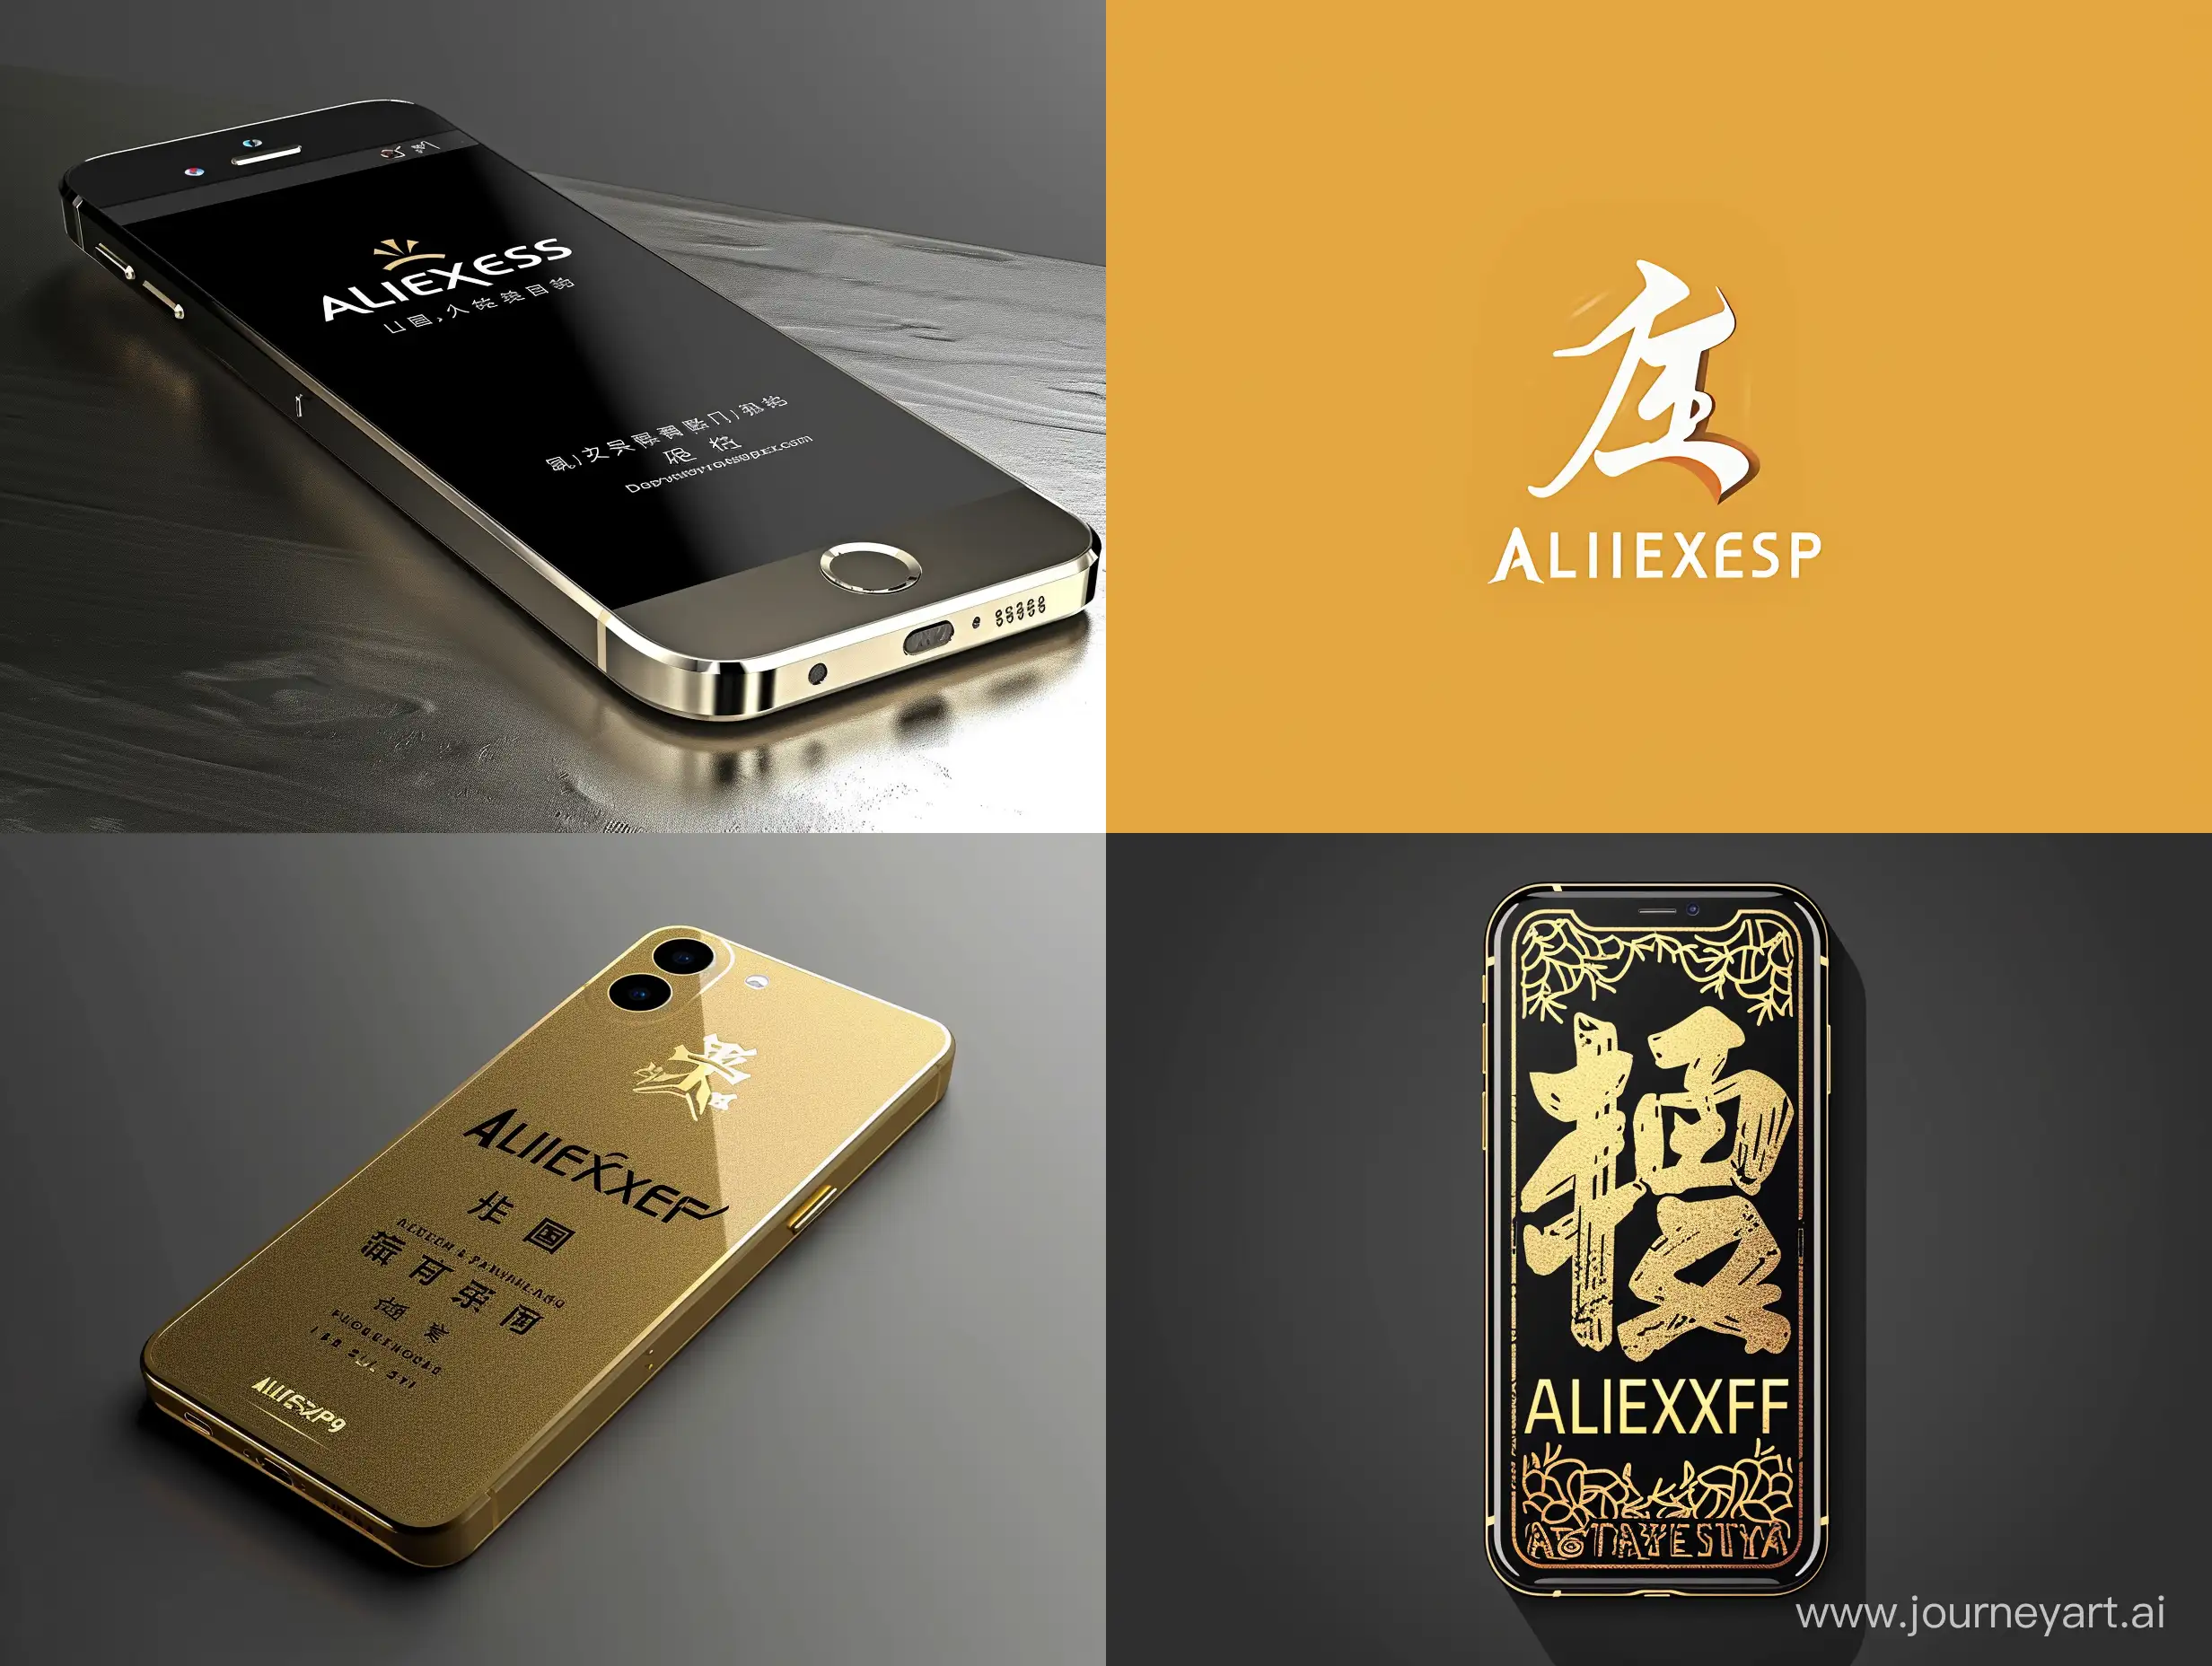 ALIEXPRESS-Logo-Emblem-and-iPhone-in-Simplified-Aggressive-Chinese-Style-Side-View